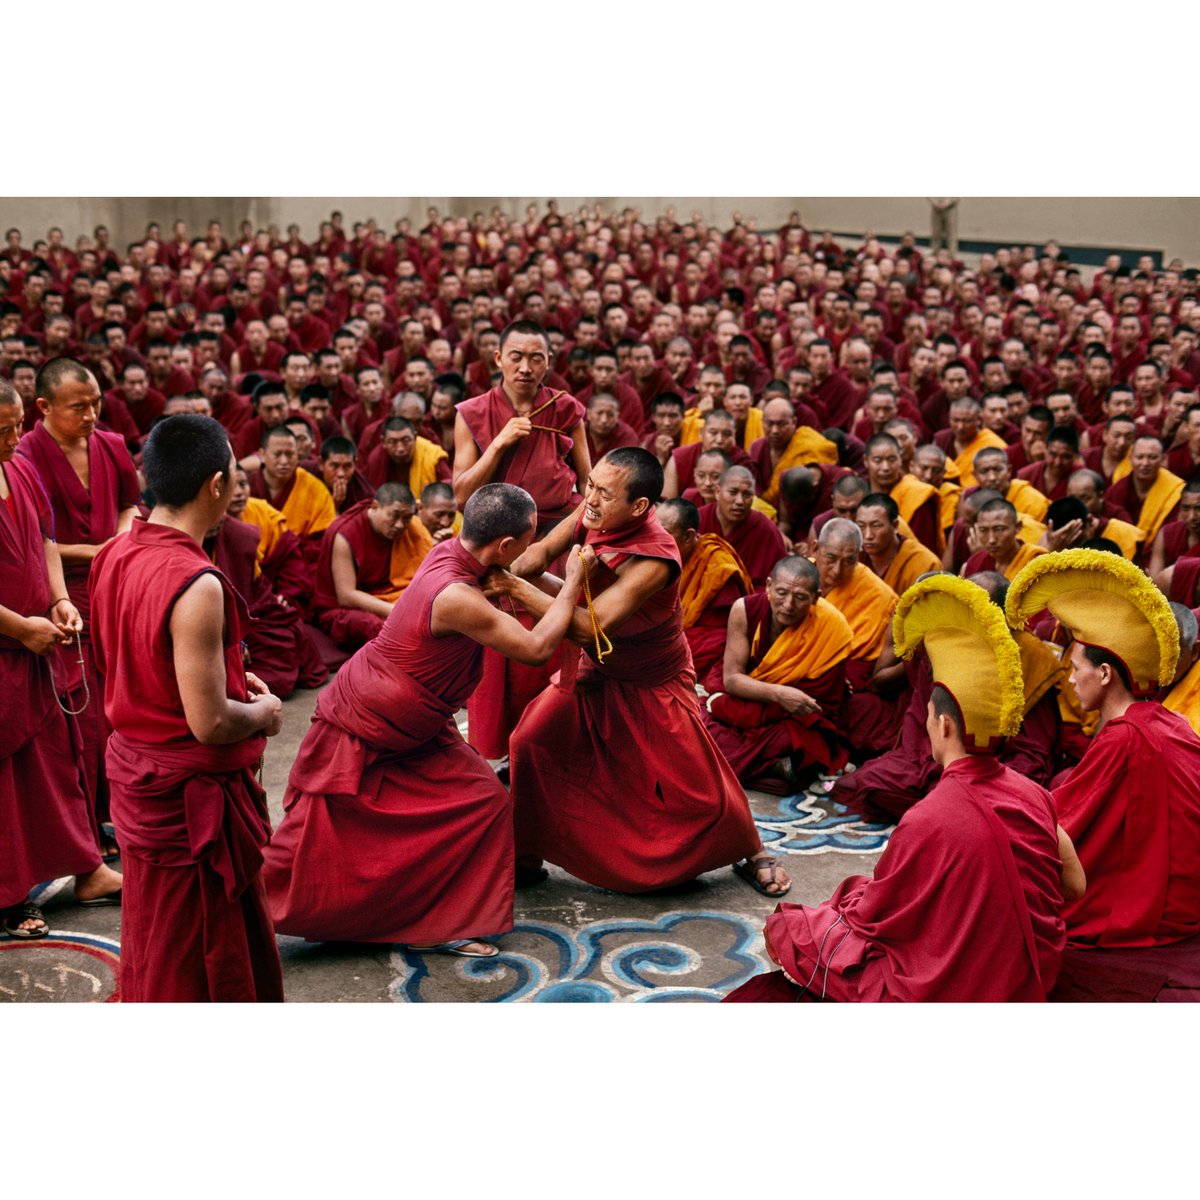 Tibetan Monks fiercely debate the nature of reality with humor and passion. In Tibetan Buddhism, debate is considered an integral part of sharpening one's analytical capabilities and demonstrating one's understanding of Buddhist logic and philosophy. Sakya Monastery, Bylakuppe.